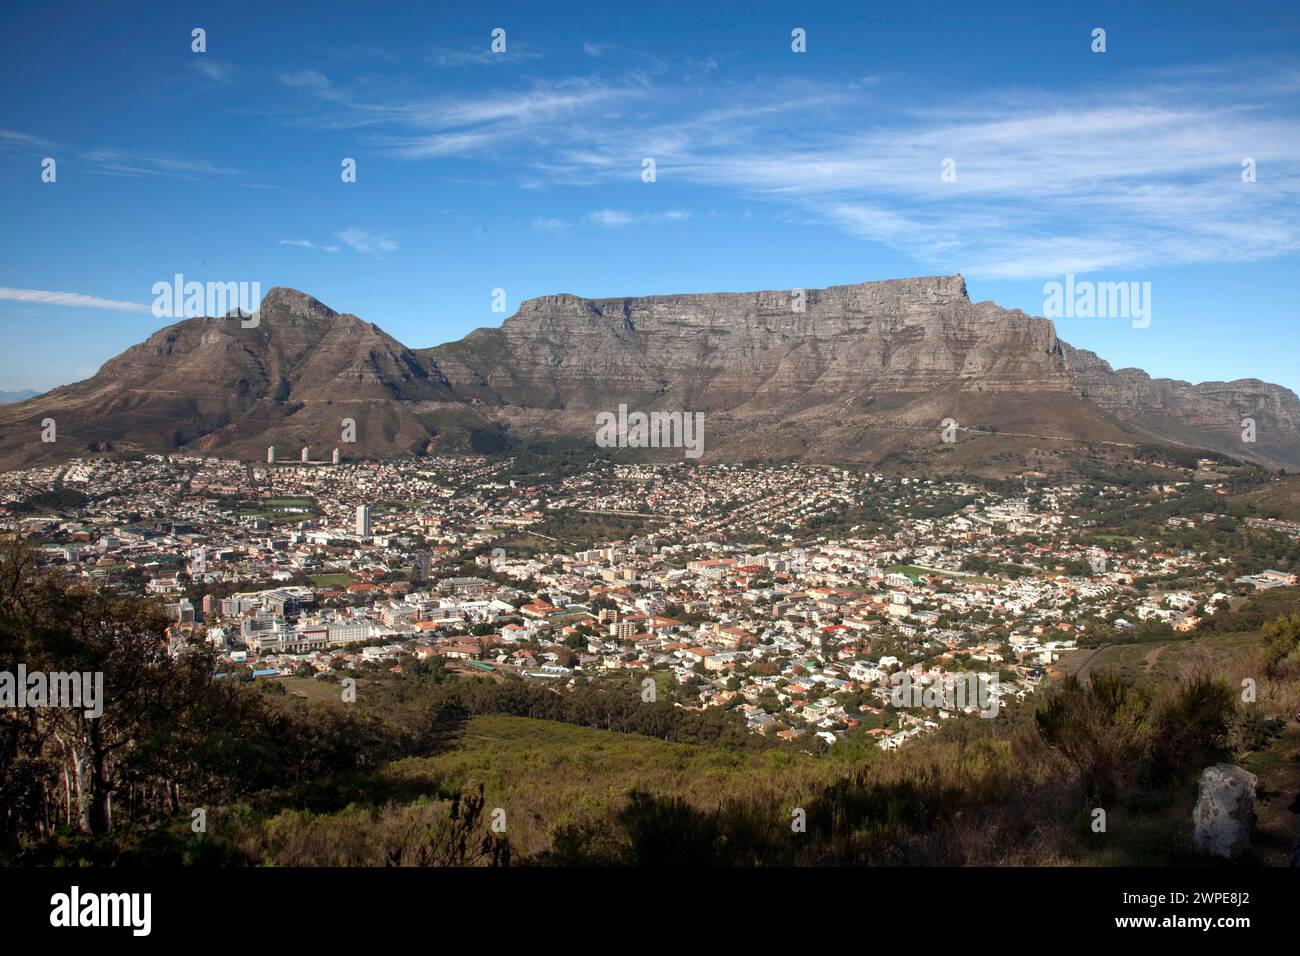 Cape Town CBD and the urban city area, viewd from Signal Hill, Western Cape, South Africa. Stock Photo